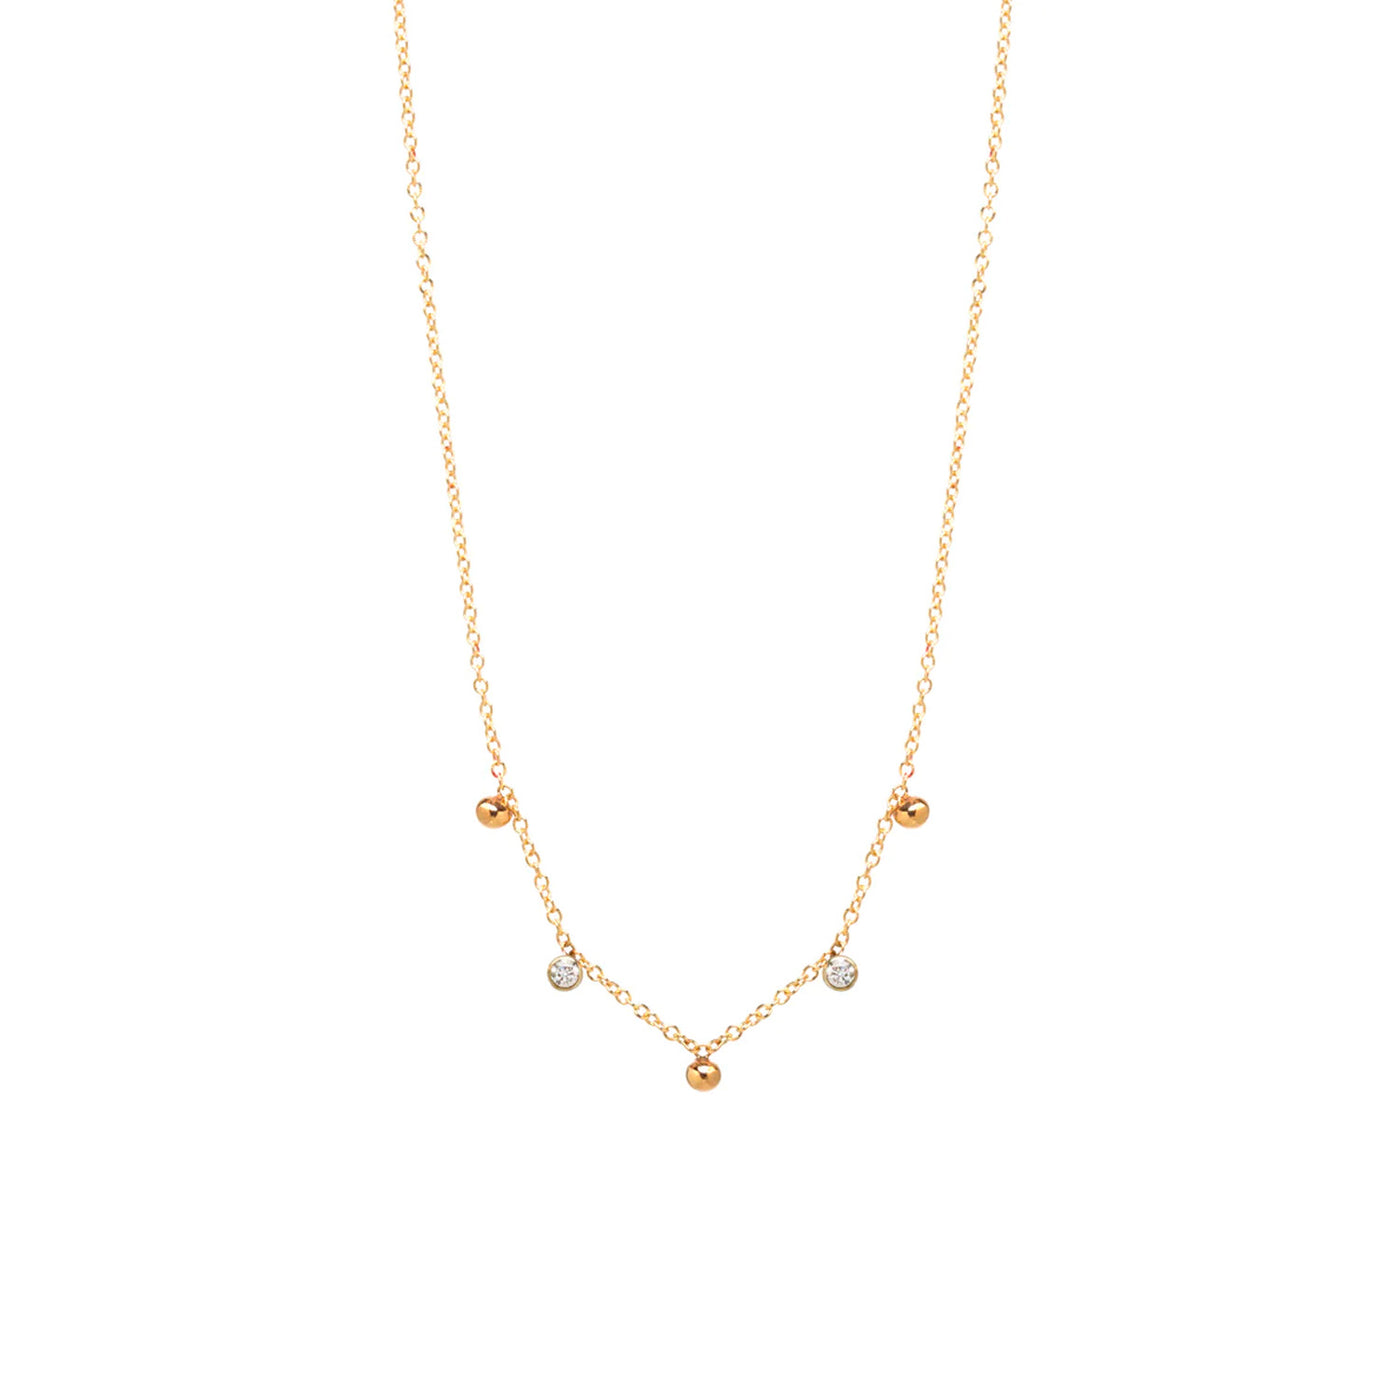 Scattered Diamond With Tiny Gold Bead Necklace